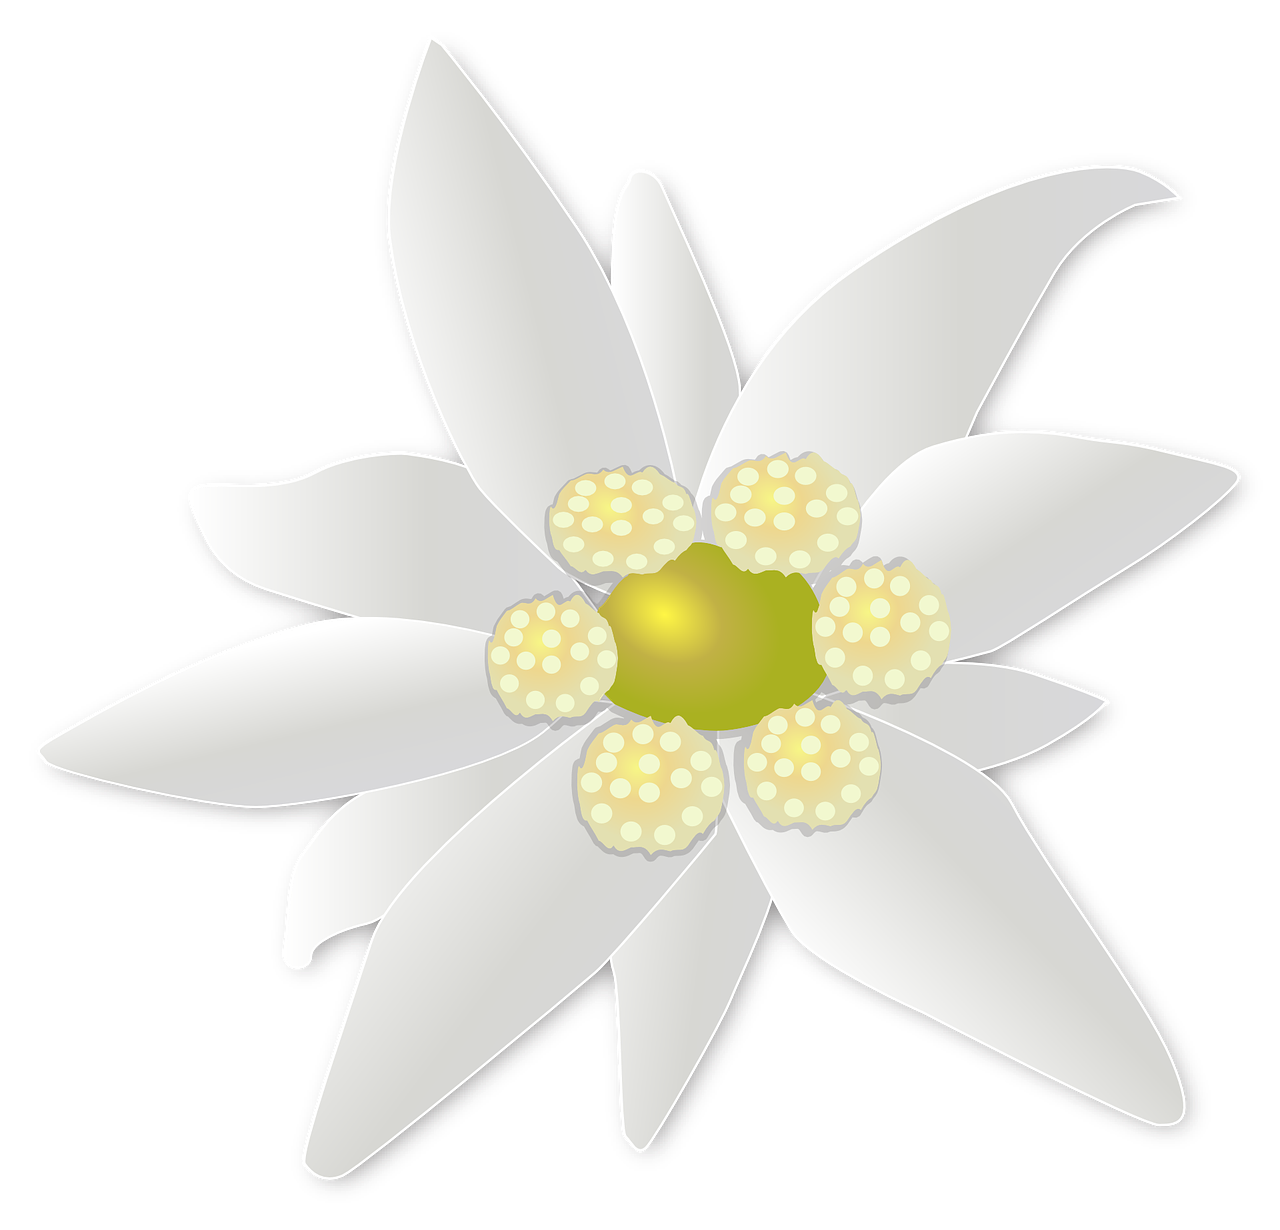 Edelweiss Transparent Images